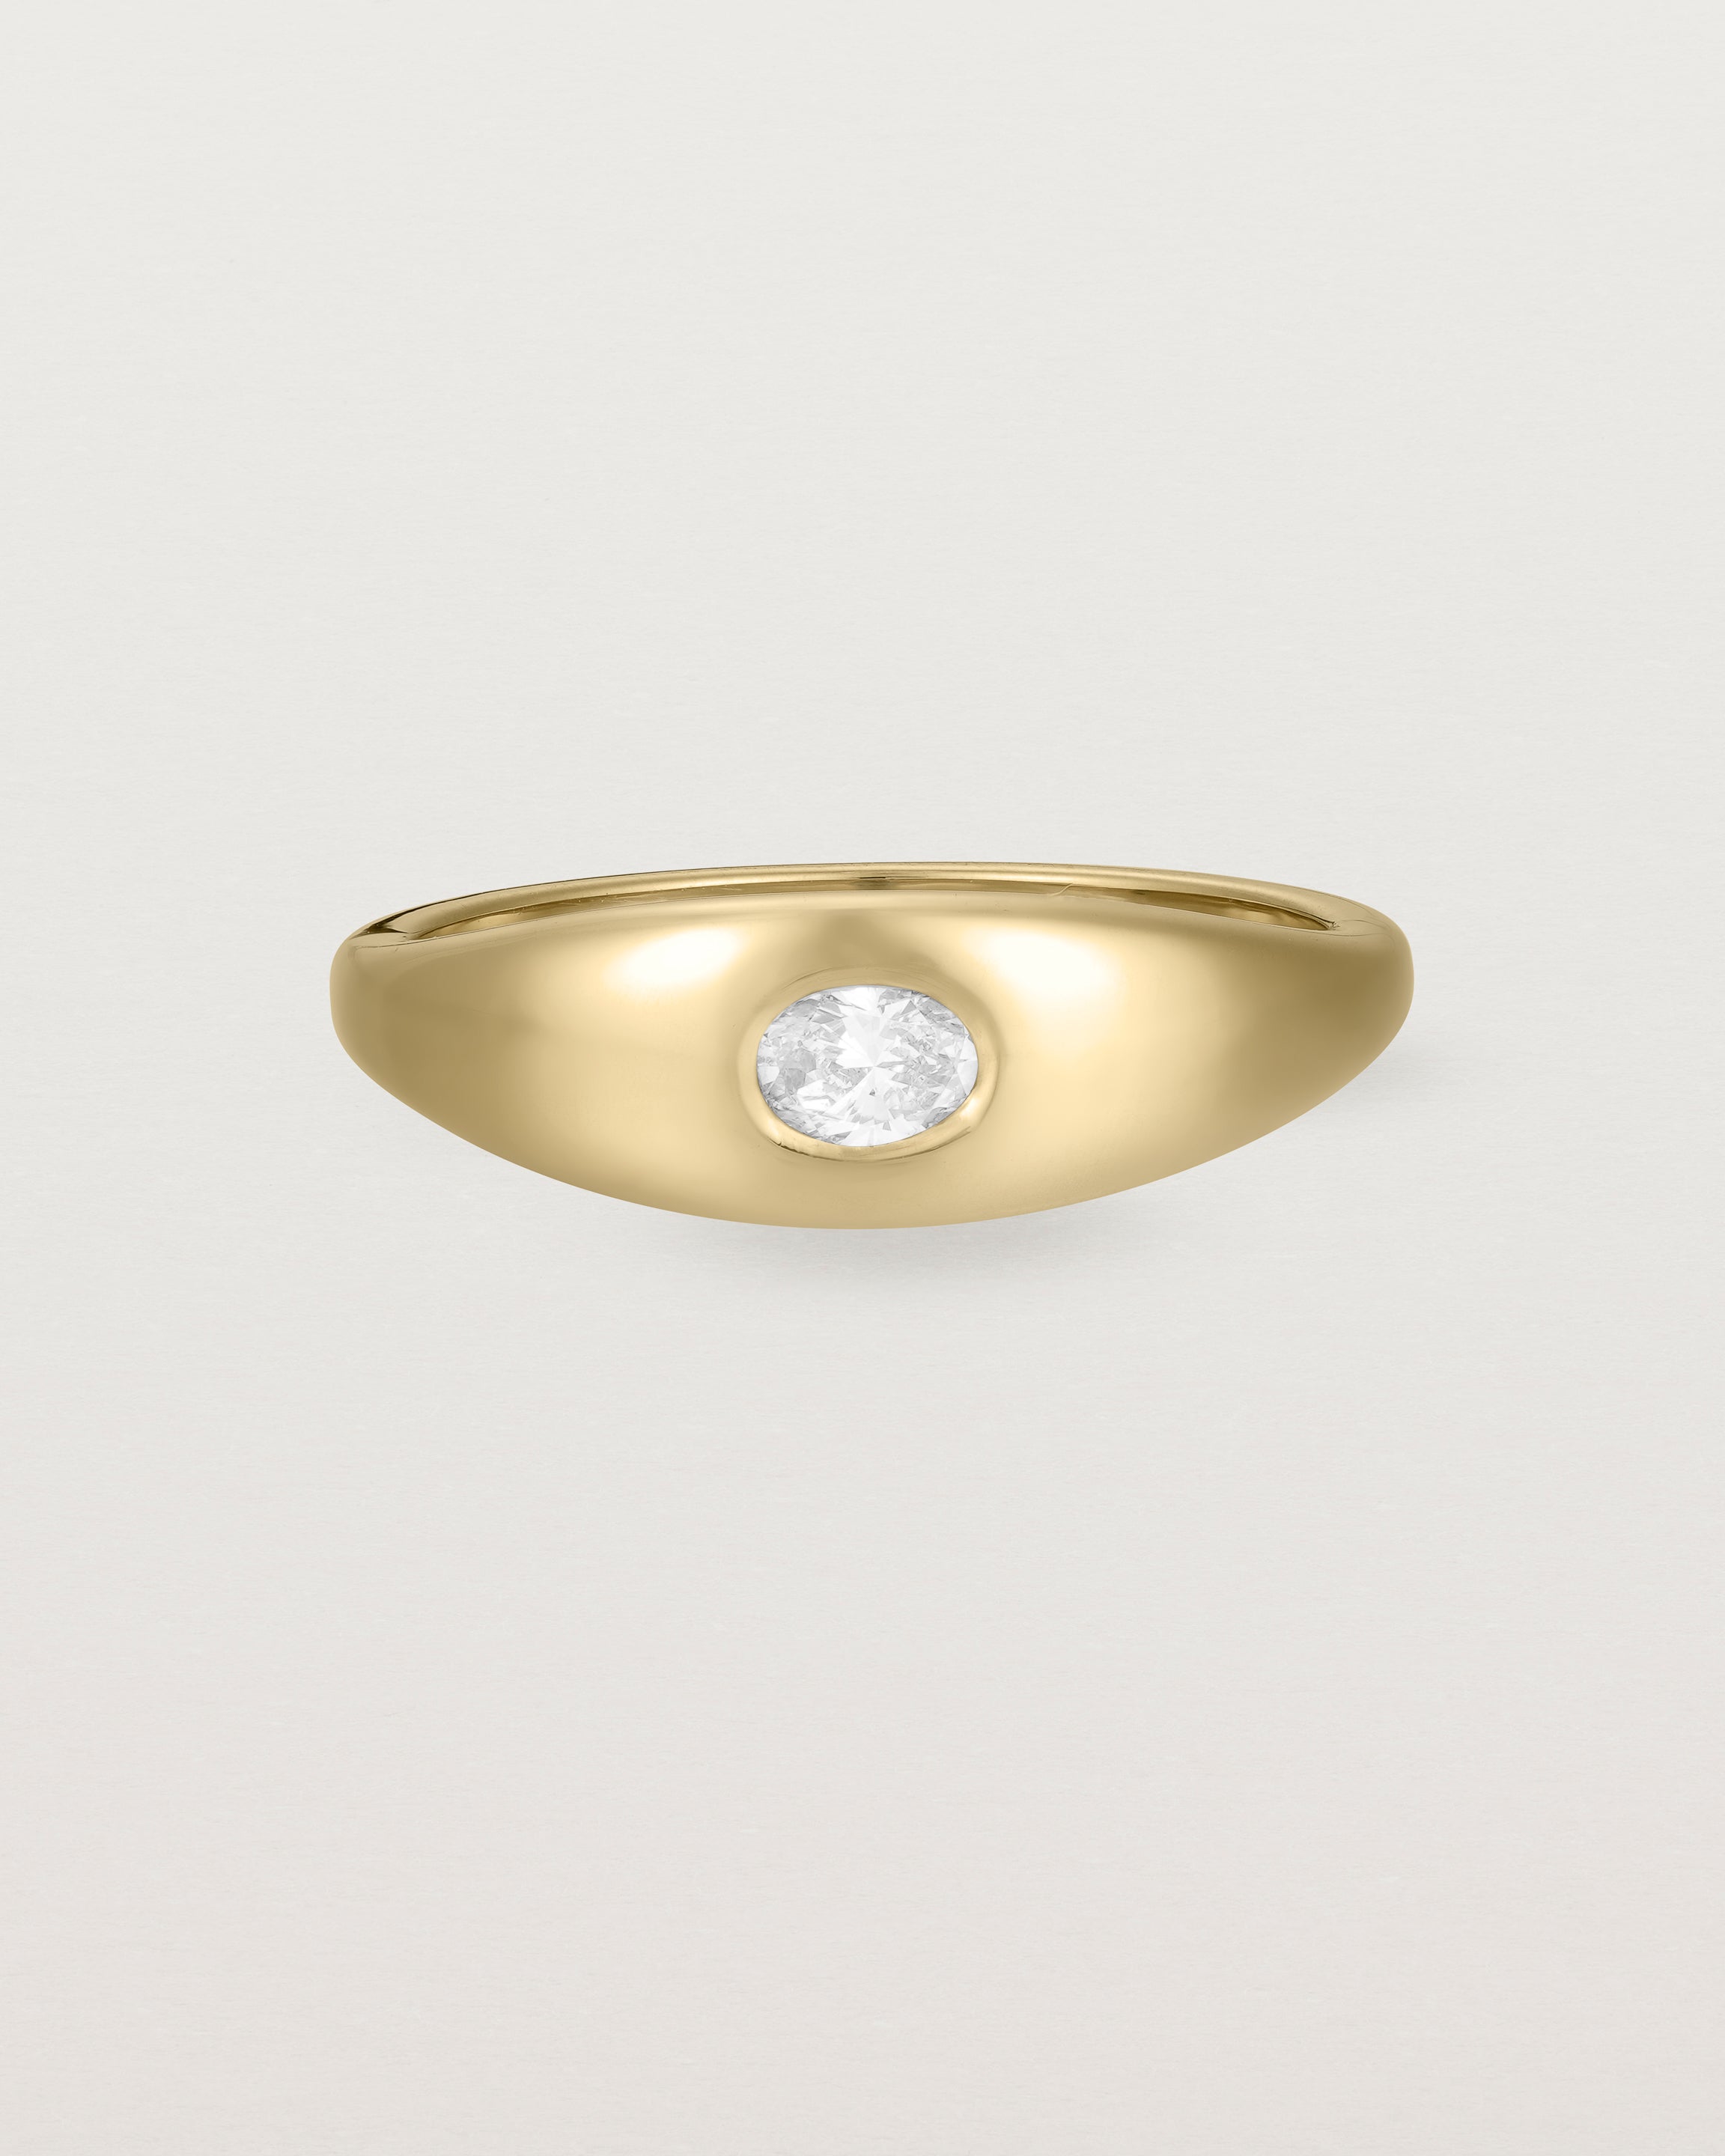 Front view of the Seule Single Ring | Diamond | Yellow Gold.